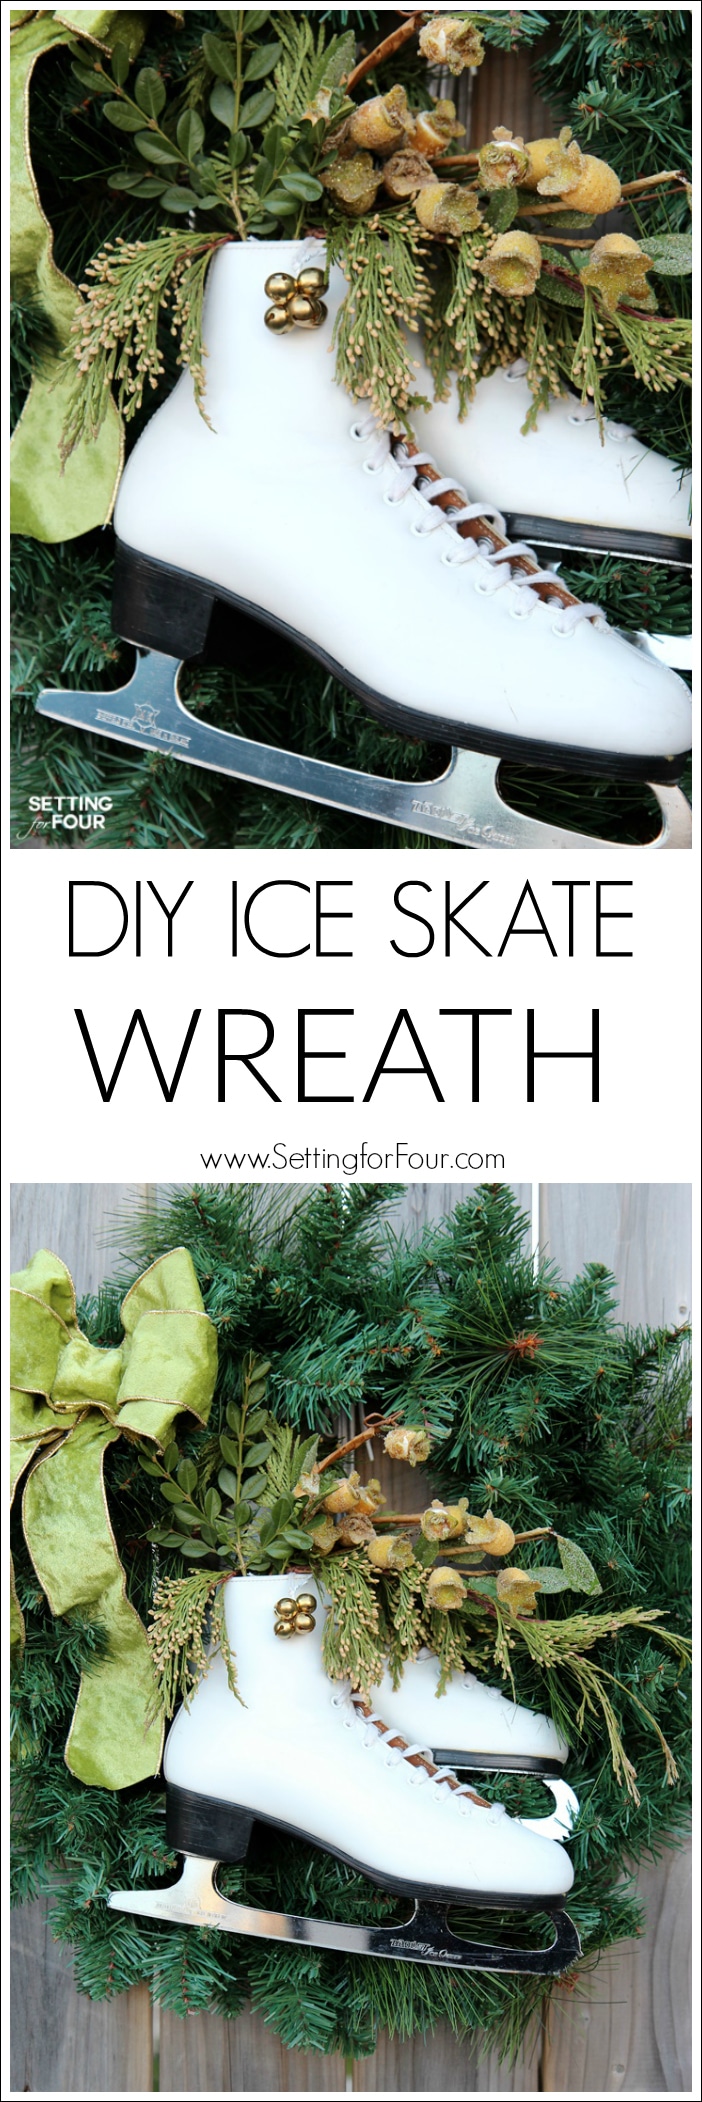 Learn how to make this easy, beautiful DIY ice skate wreath to add festive decor to your home for Christmas and winter! Adds curb appeal to your front door for the holidays!